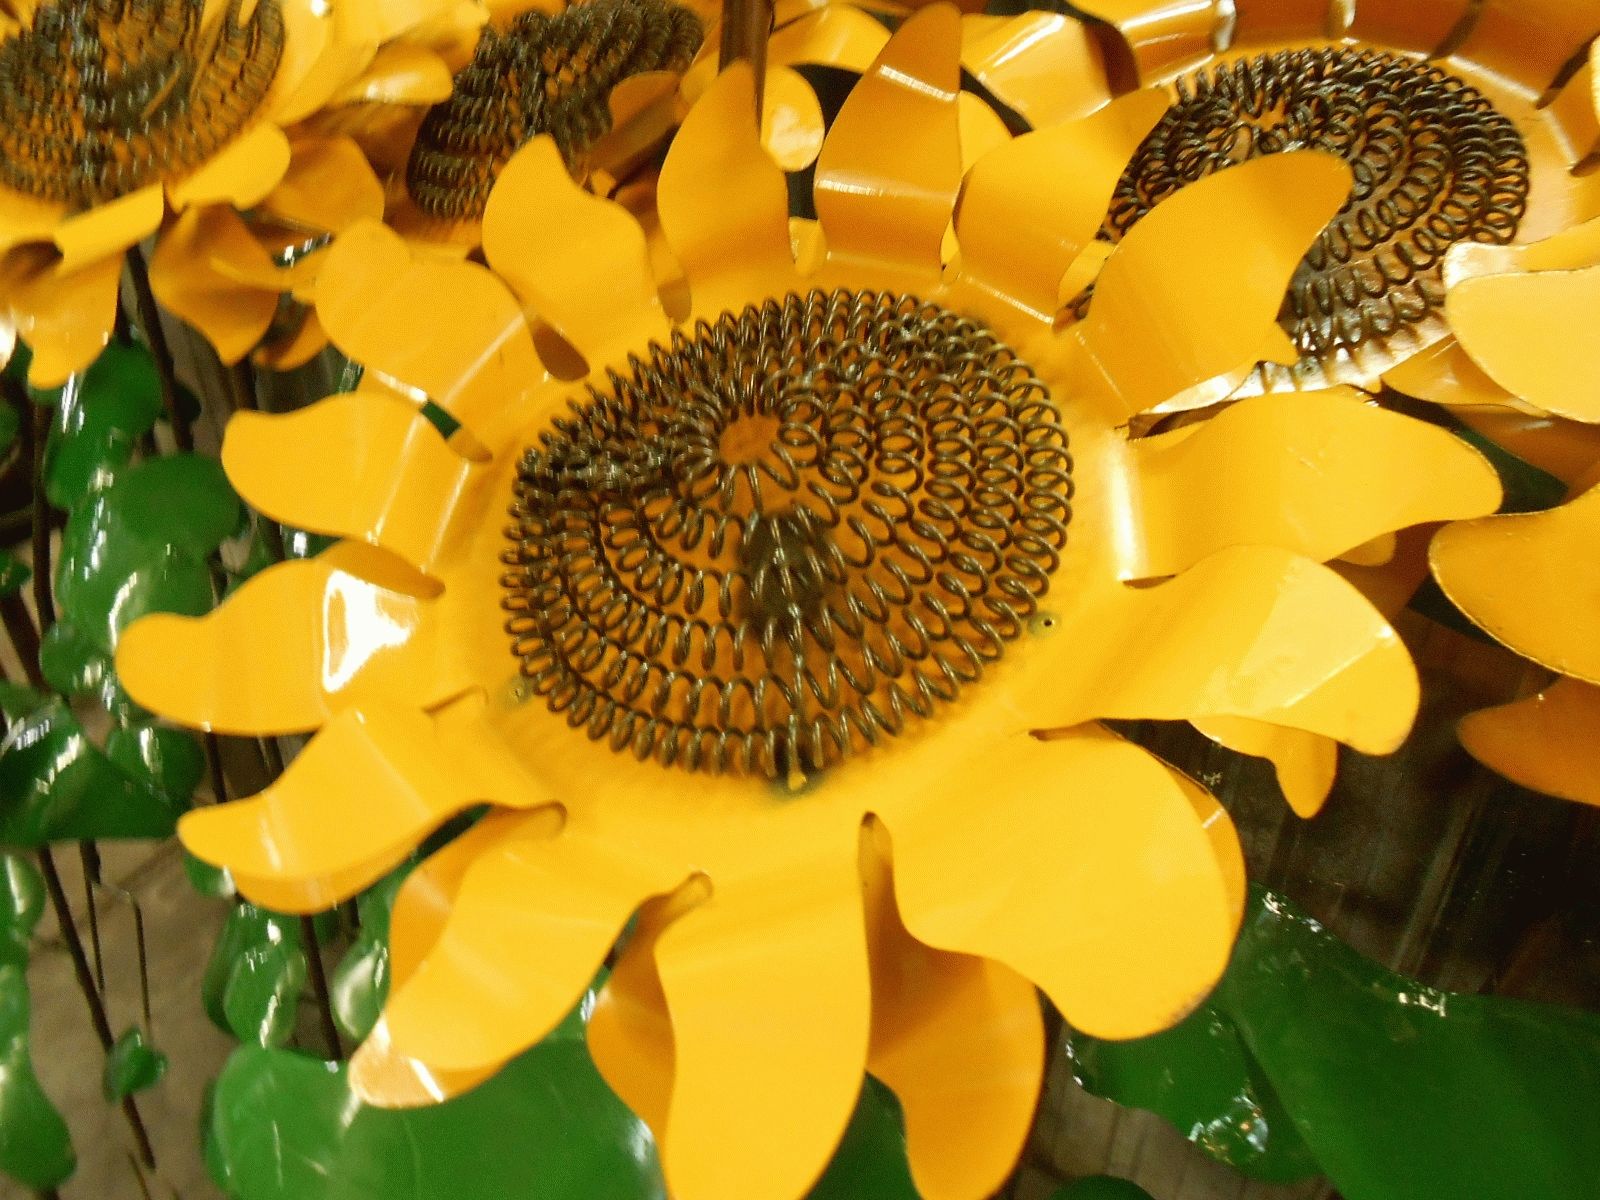 67" Recycled Metal Giant Sunflower Stake – Yard Decor Intended For Newest Metal Sunflower Yard Art (View 11 of 26)